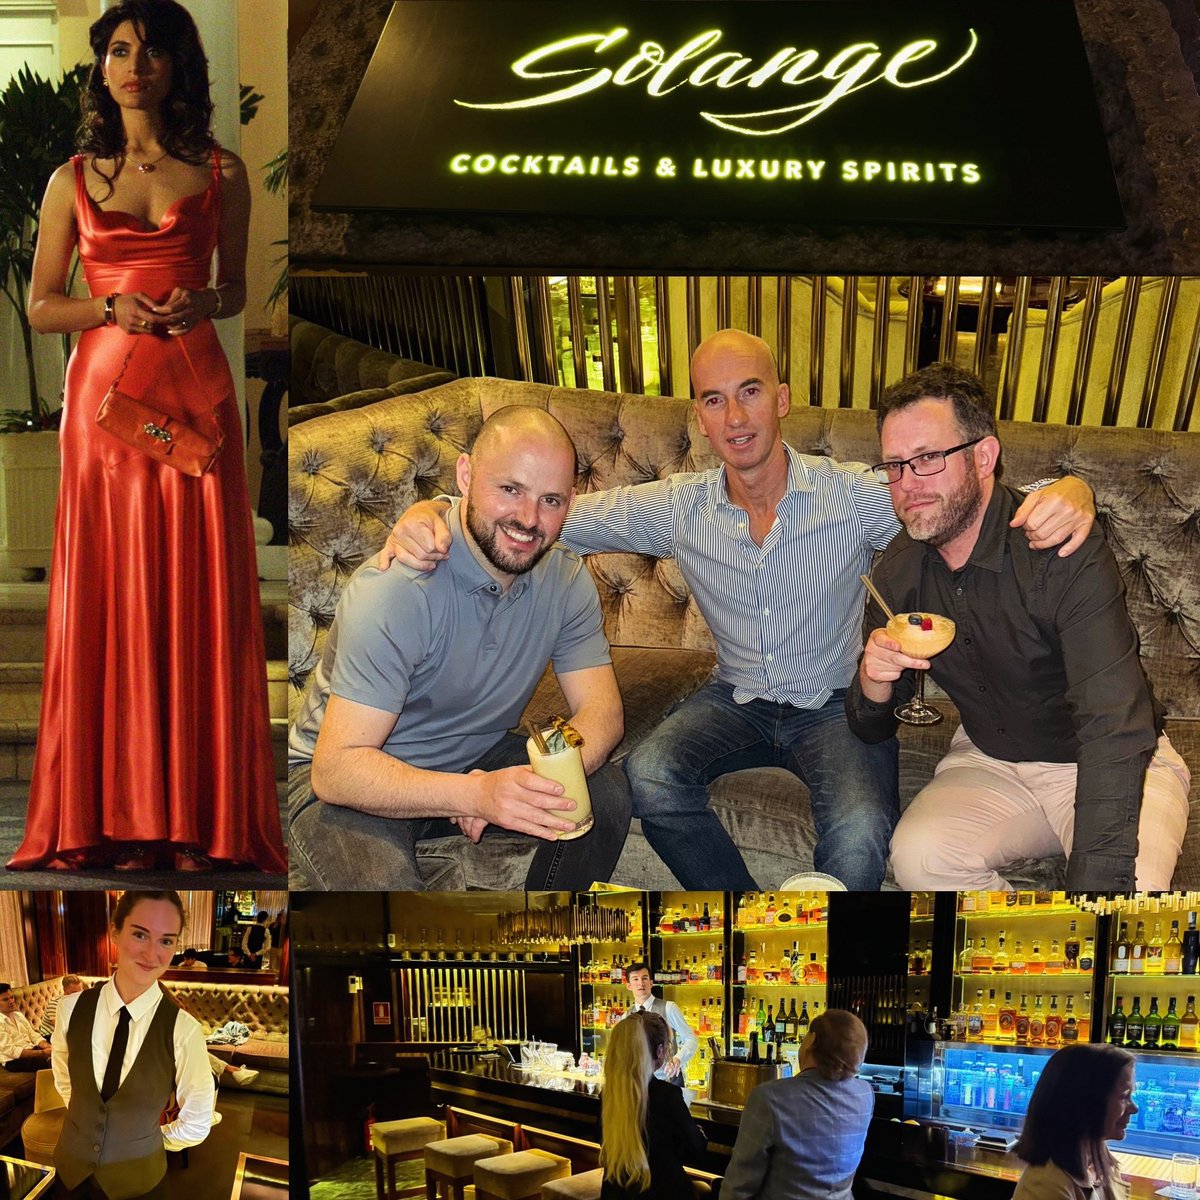 Tom and friends found an outstanding cocktail bar in Barcelona - Solange! 👗🍸🇪🇸💃🏻 #CasinoRoyale